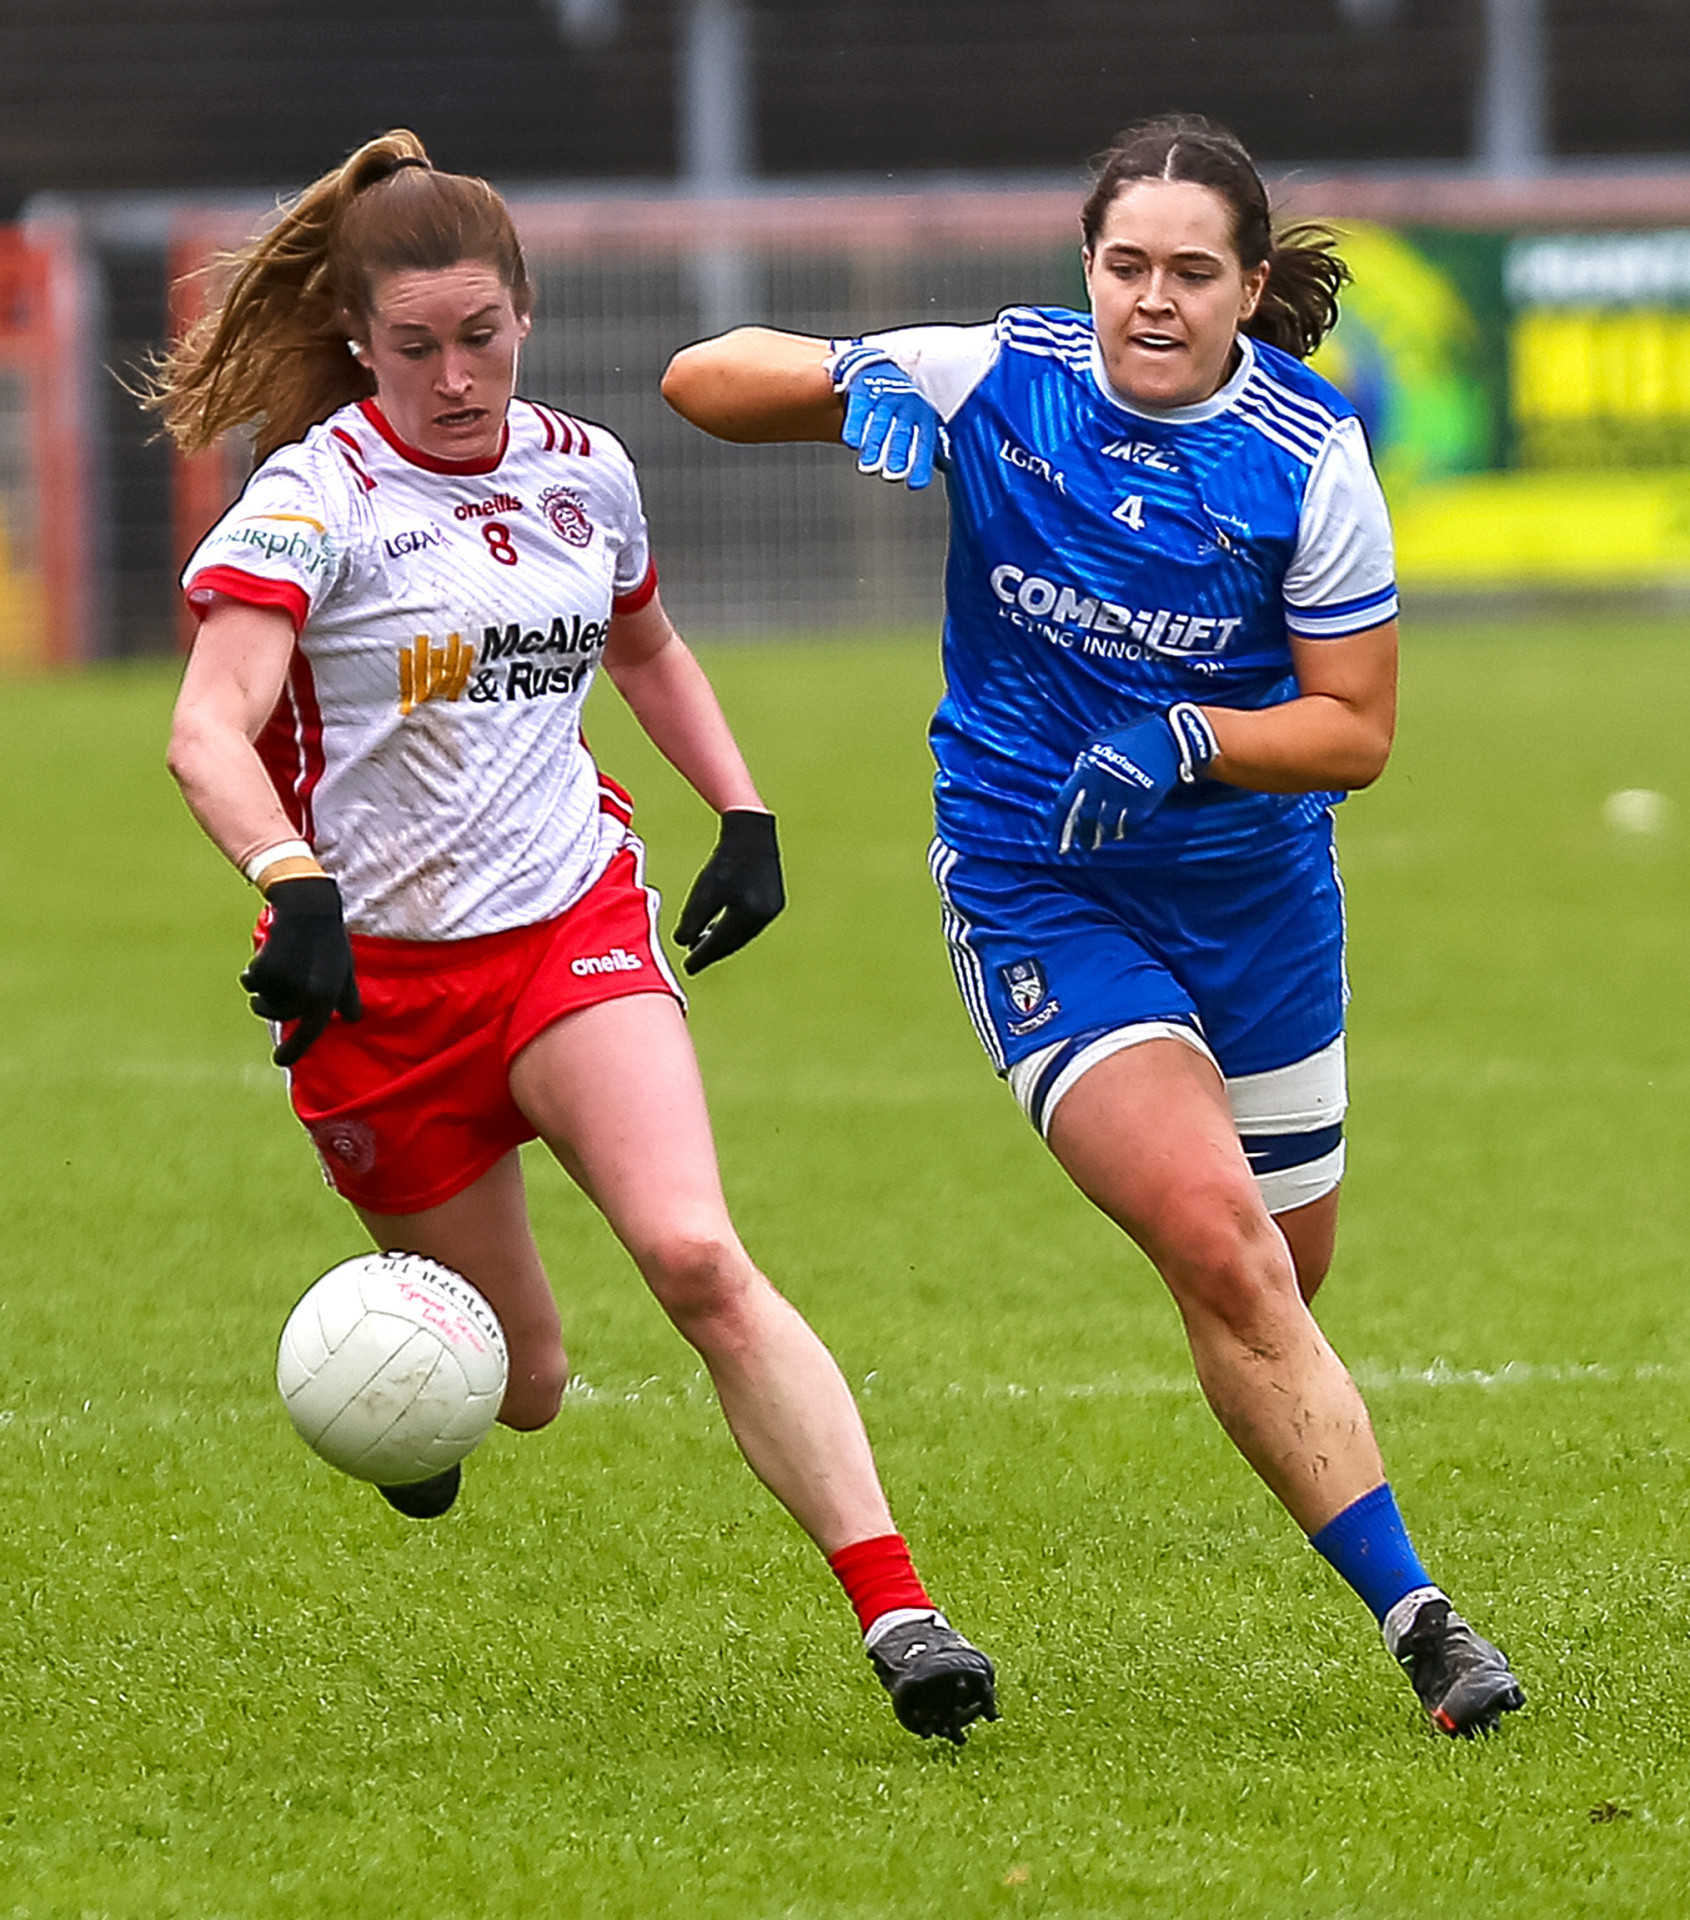 Injury-plagued season ends in disappointment for Tyrone Ladies